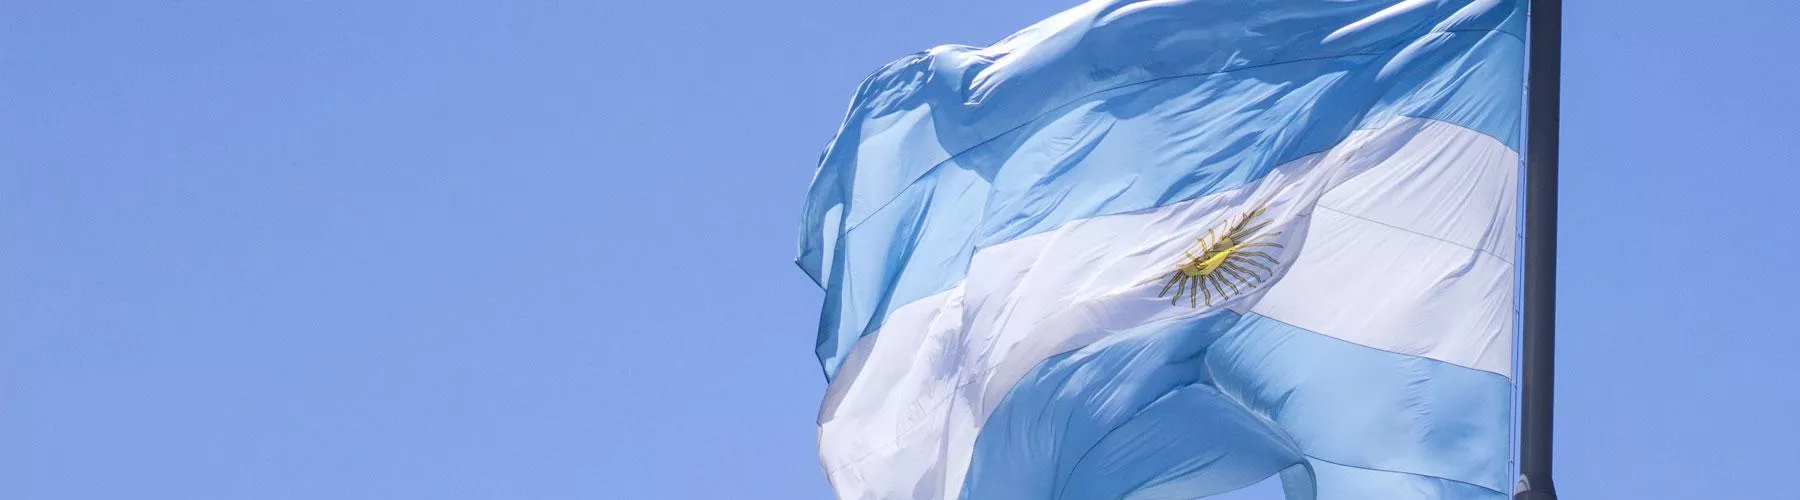 The Argentinian flag flaps in the wind